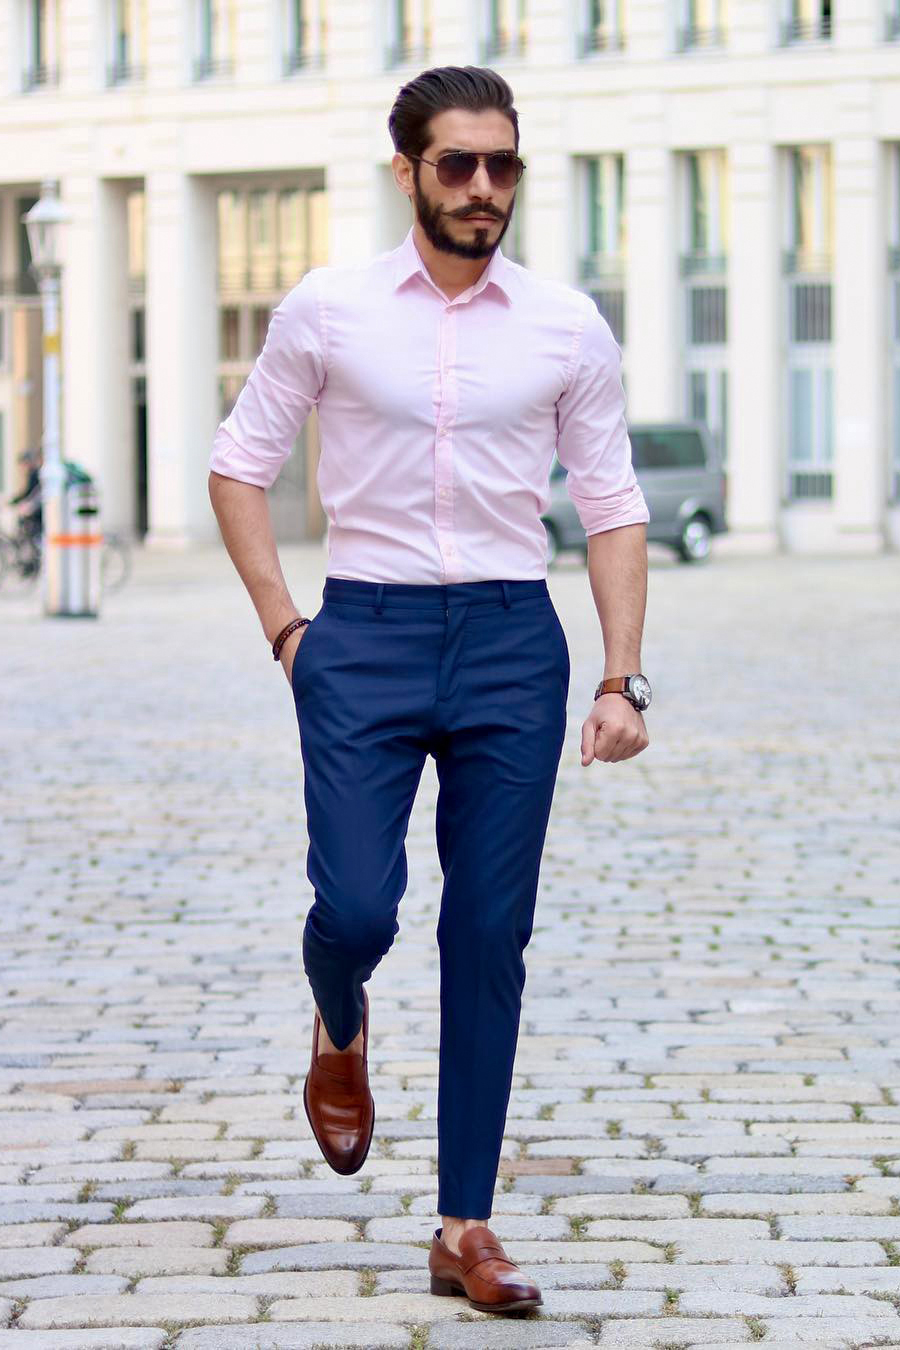 Pink dress shirt, navy pants, and brown loafers outfit